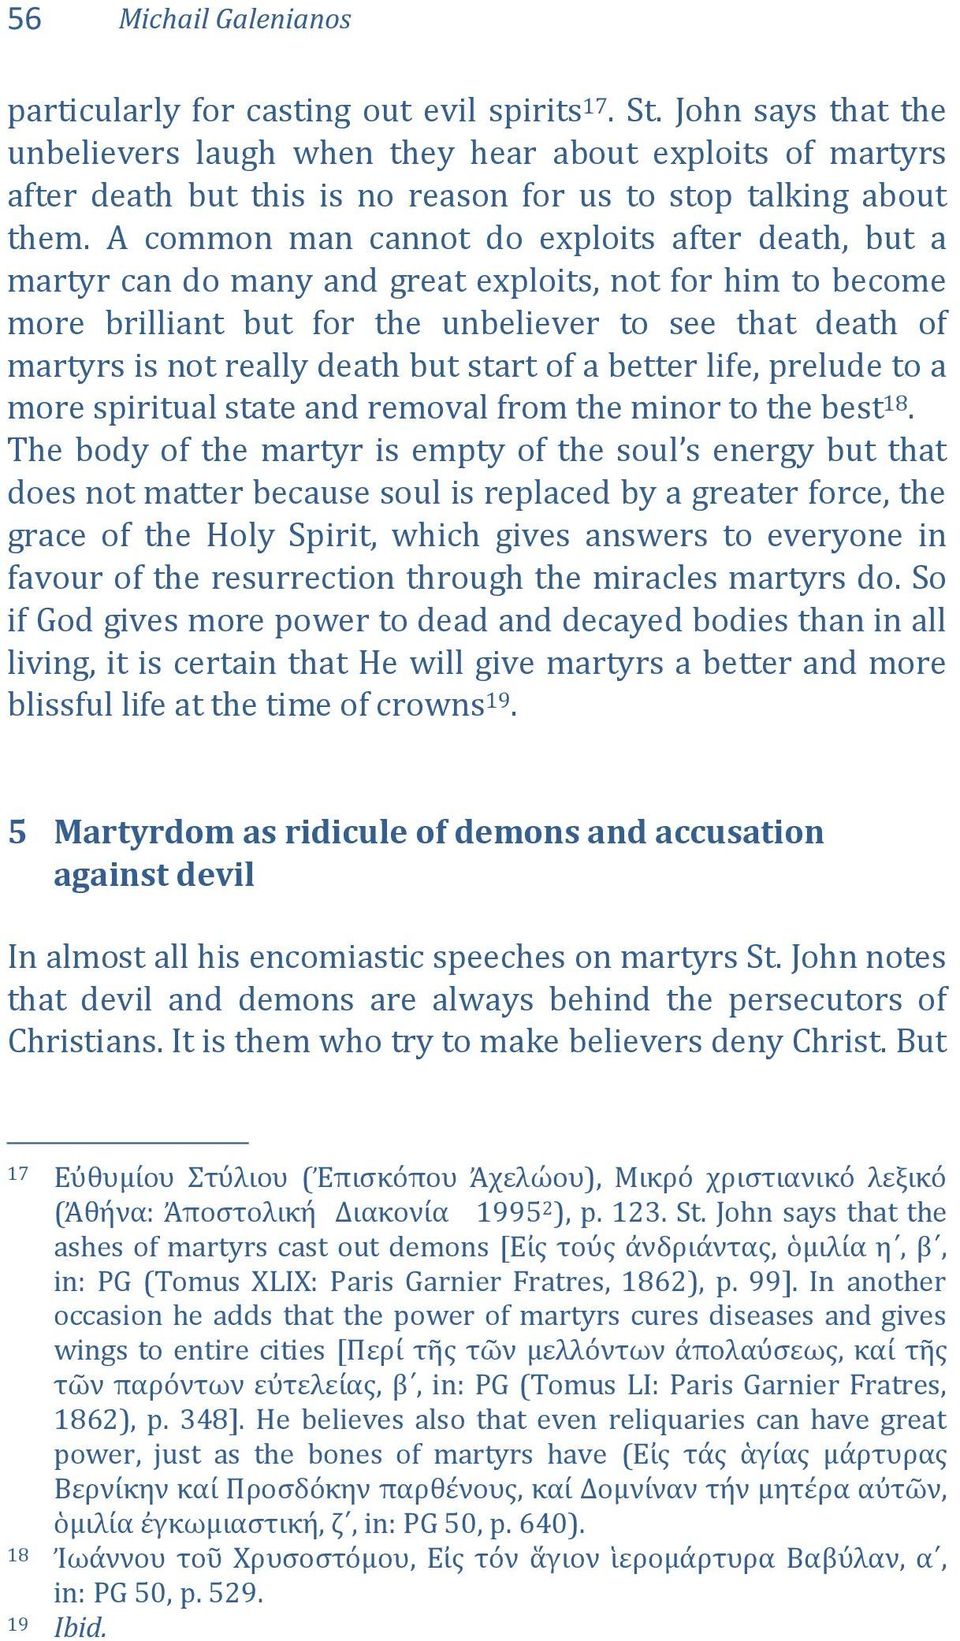 A common man cannot do exploits after death, but a martyr can do many and great exploits, not for him to become more brilliant but for the unbeliever to see that death of martyrs is not really death